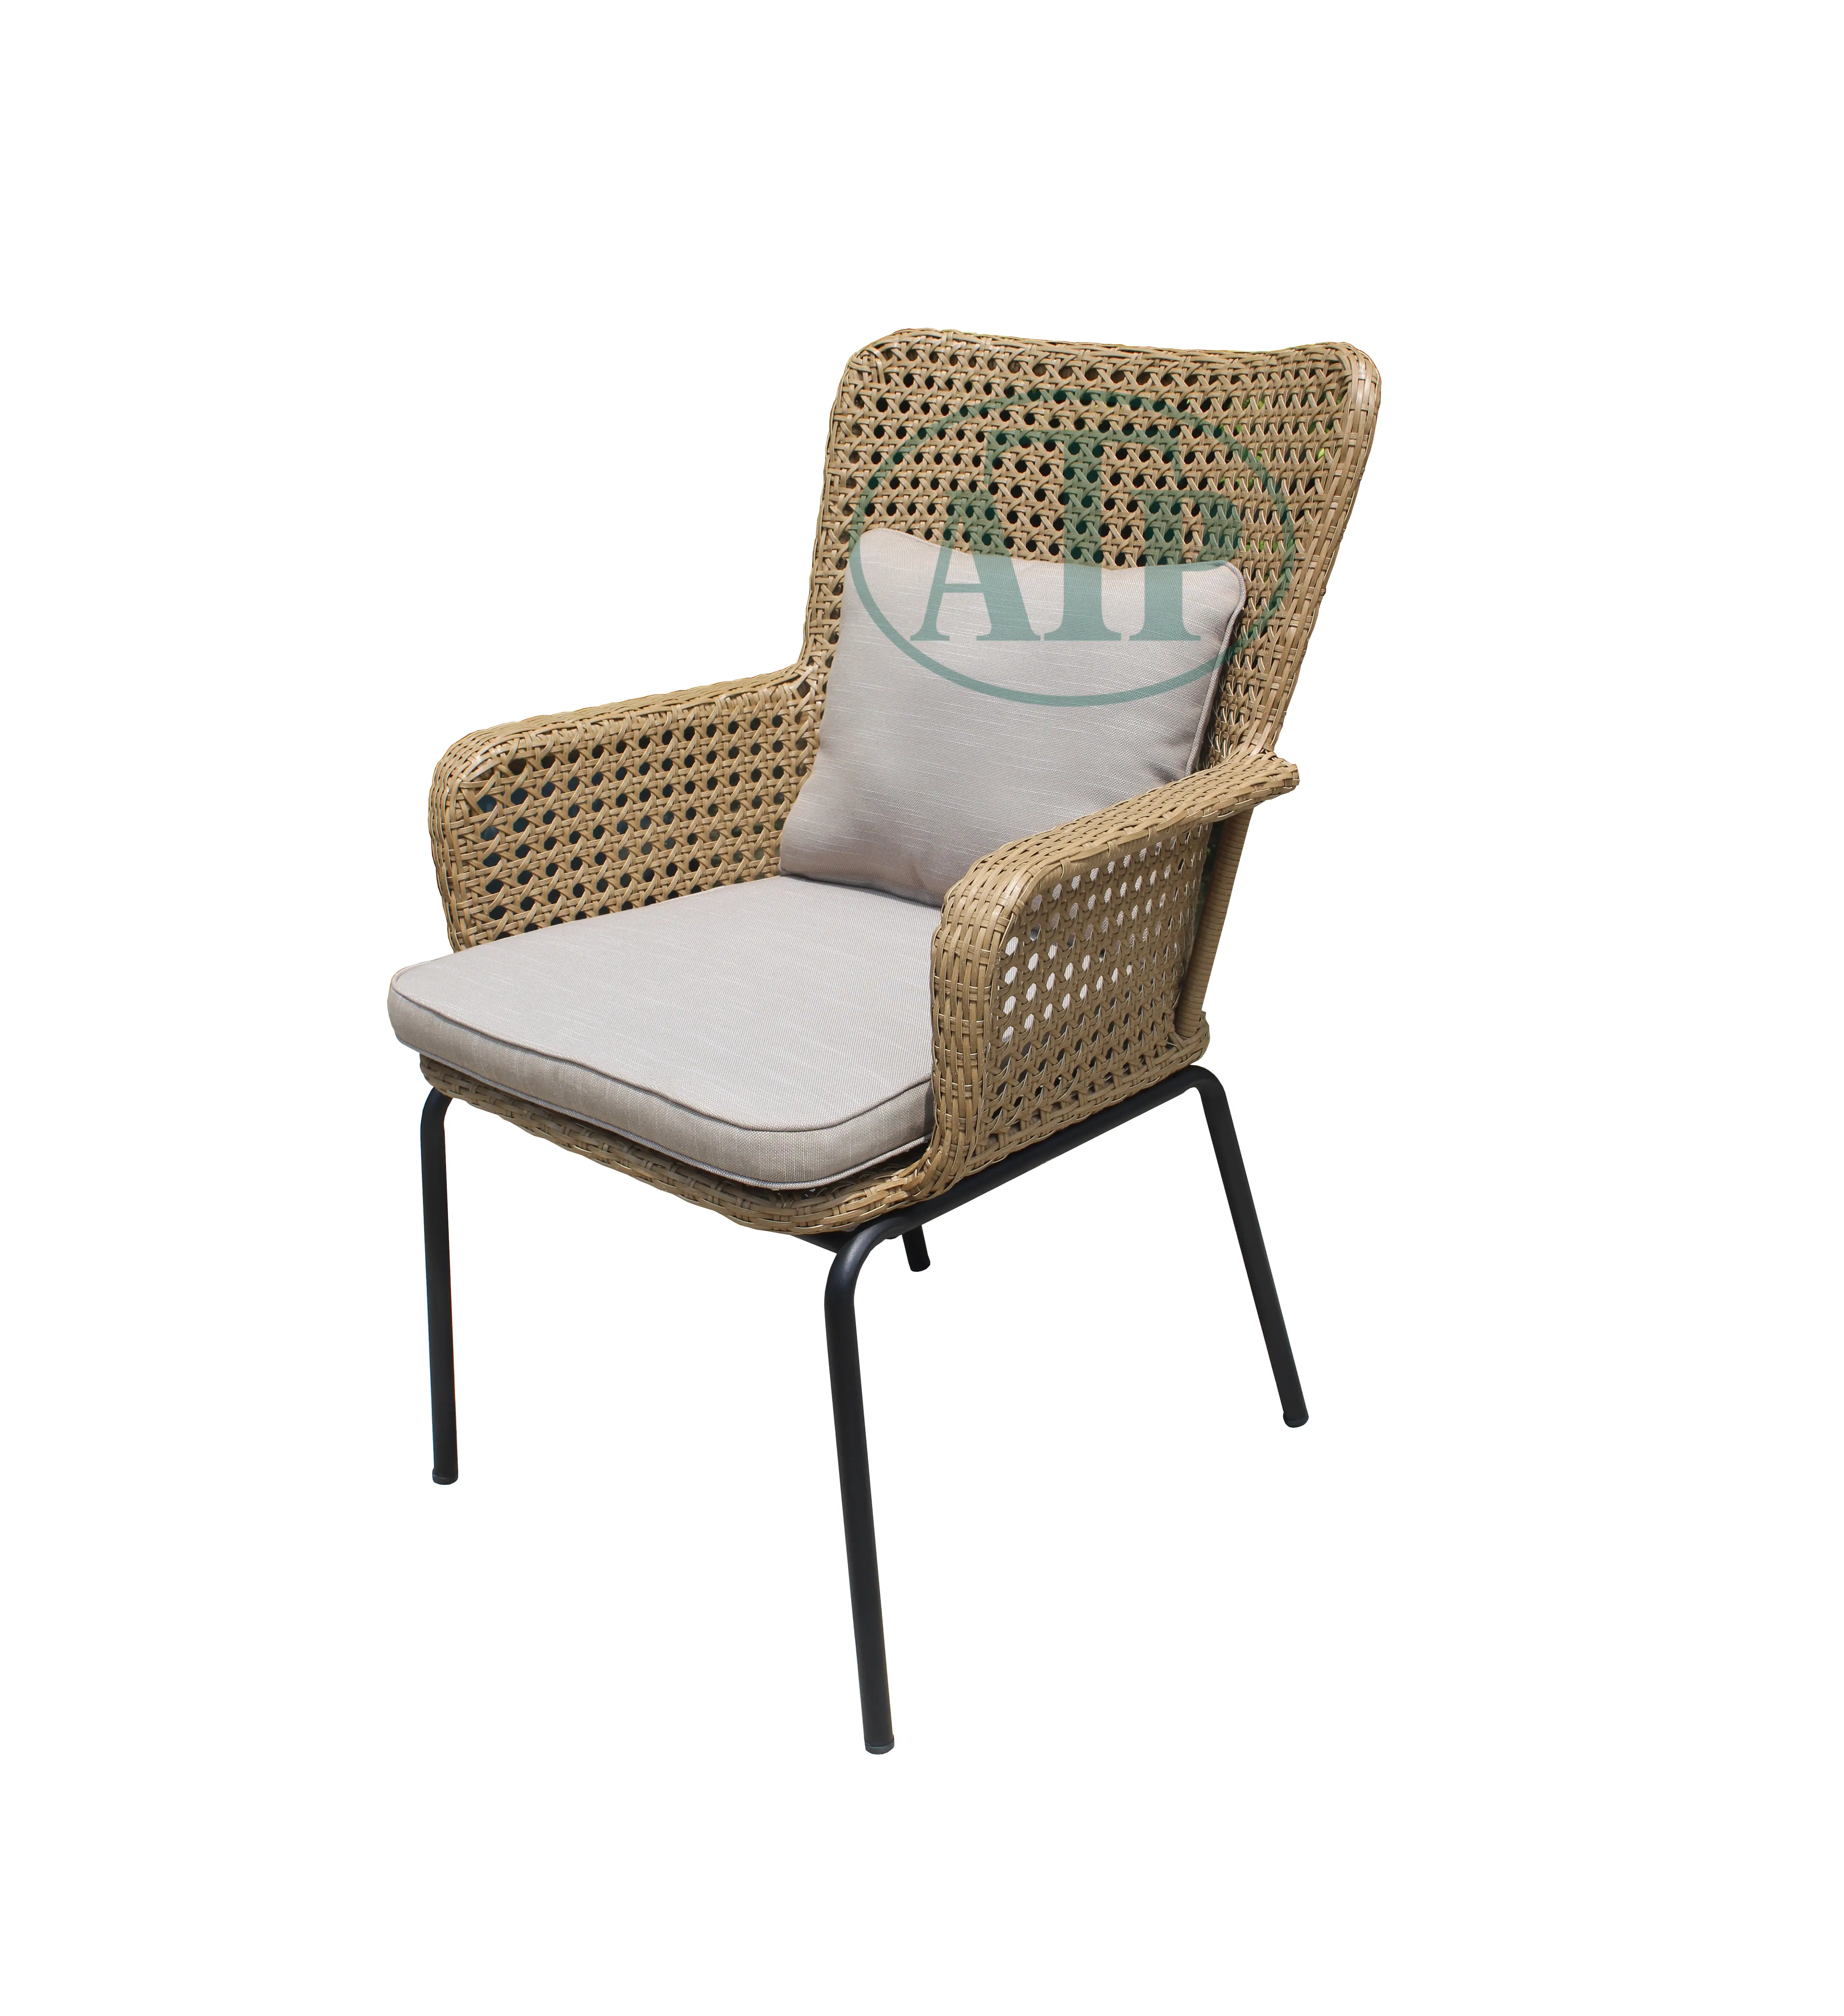 Fashion cheap leisure outdoor furniture dining high back patio rattan dining garden chair